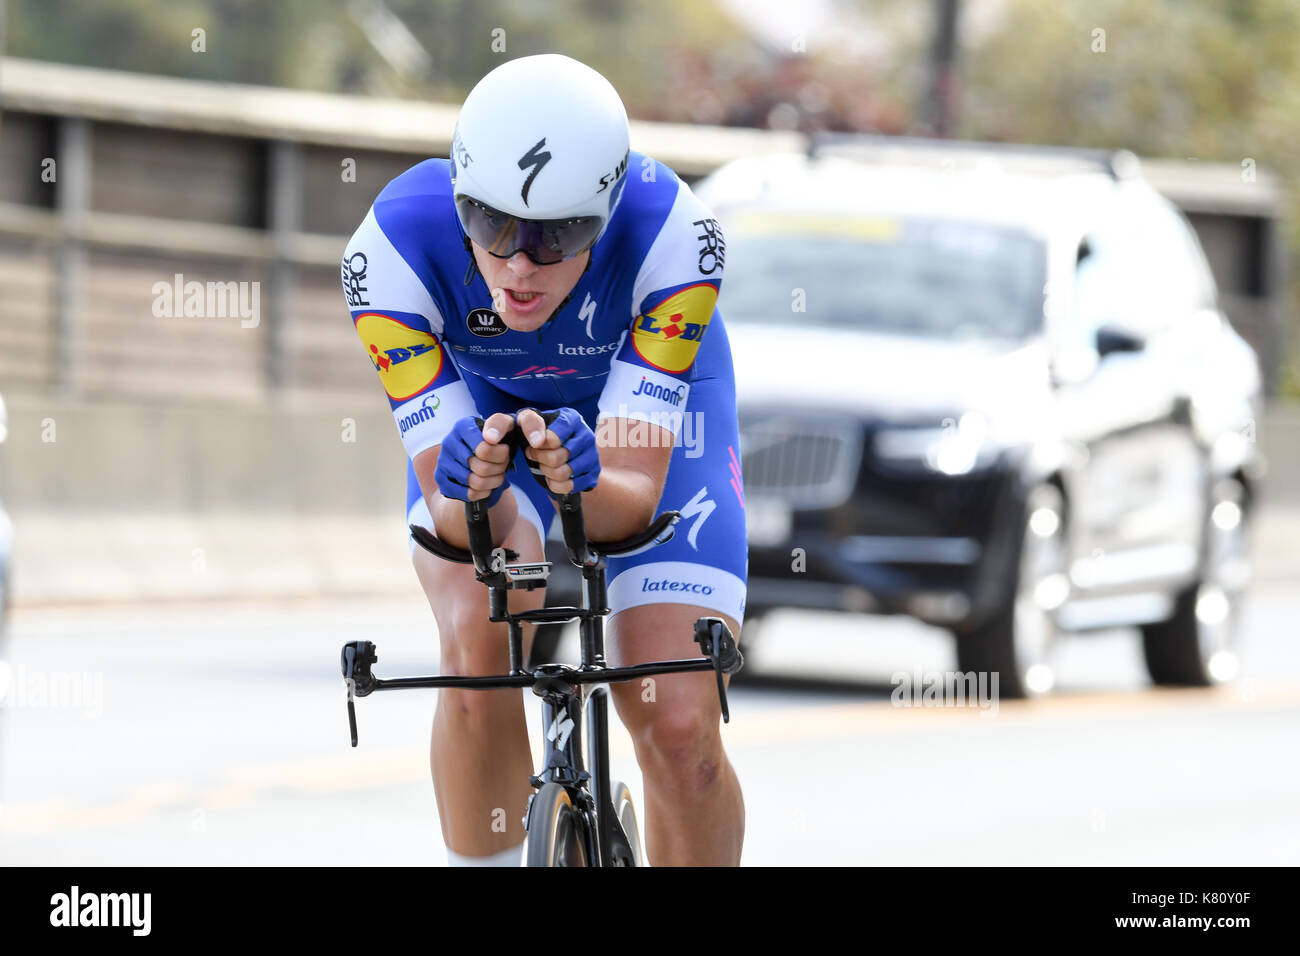 Niki Terpstra High Resolution Stock Photography and Images - Alamy